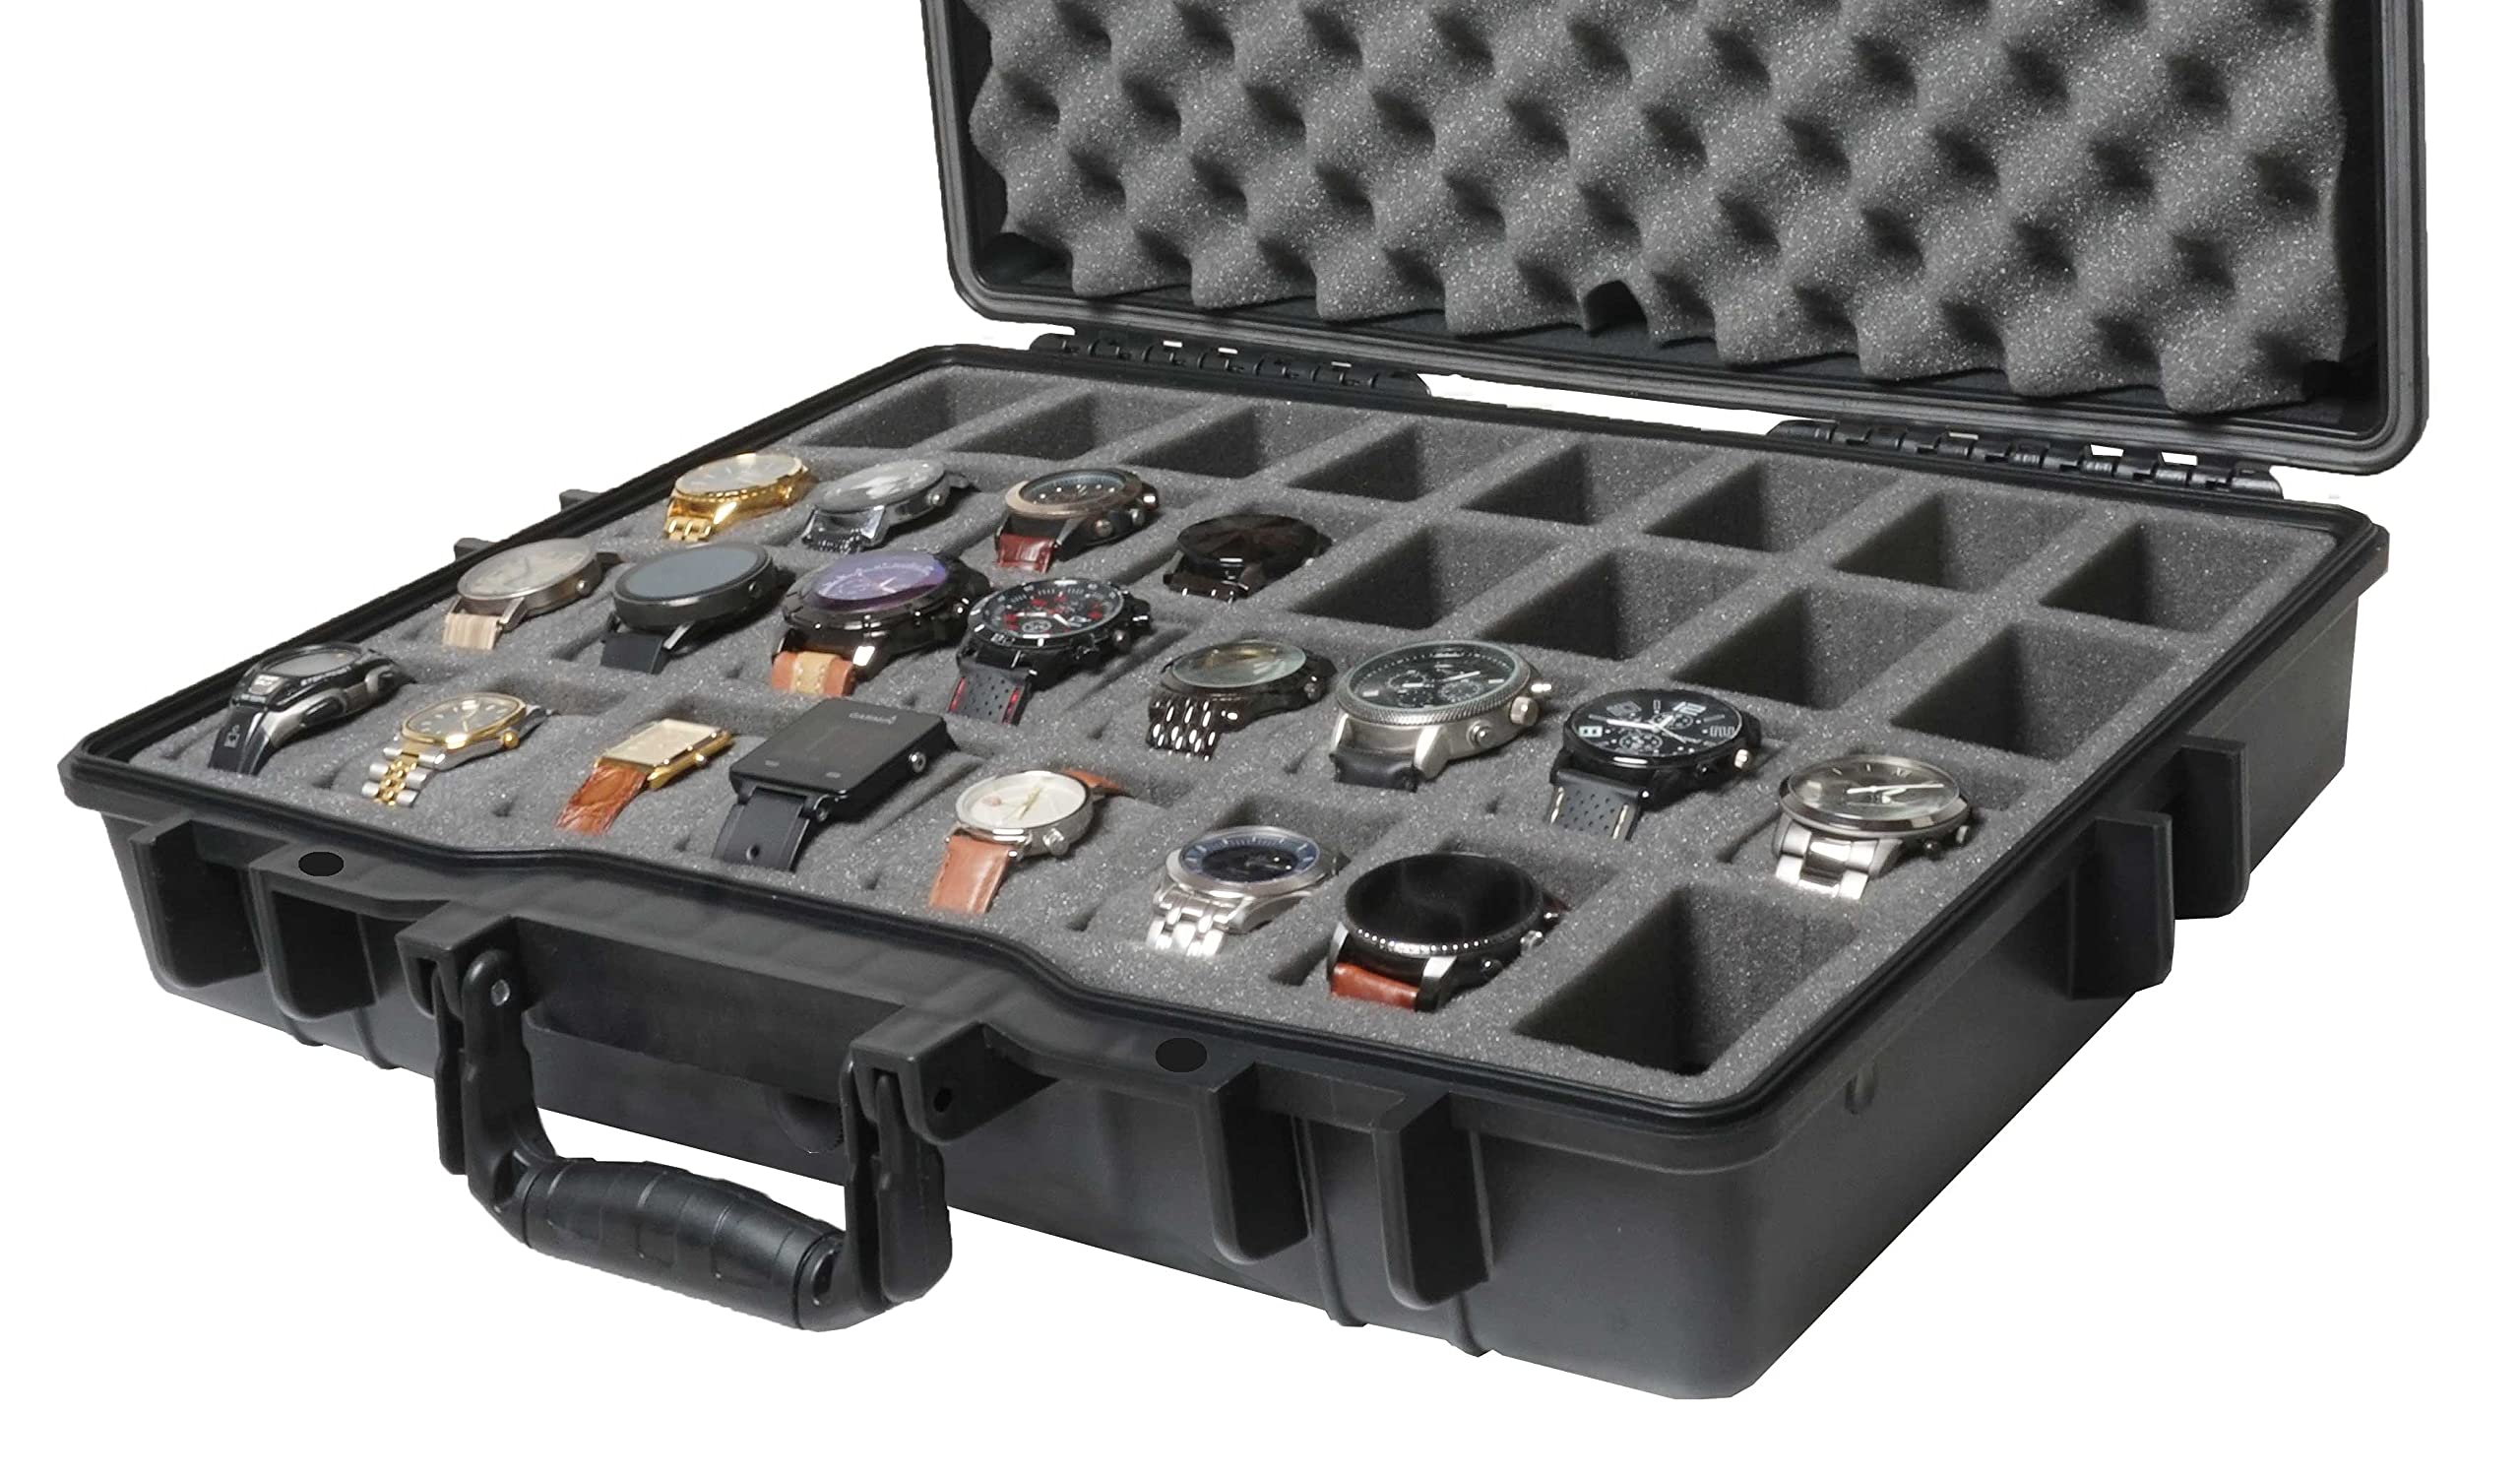 Case Club 32 Watch Carry Case - Organize & Protect Your Watch Collection in a Heavy Duty, Waterproof, Travel & Storage Case - For Men's & Women's Watches of Various Sizes in a Padlockable Display Box